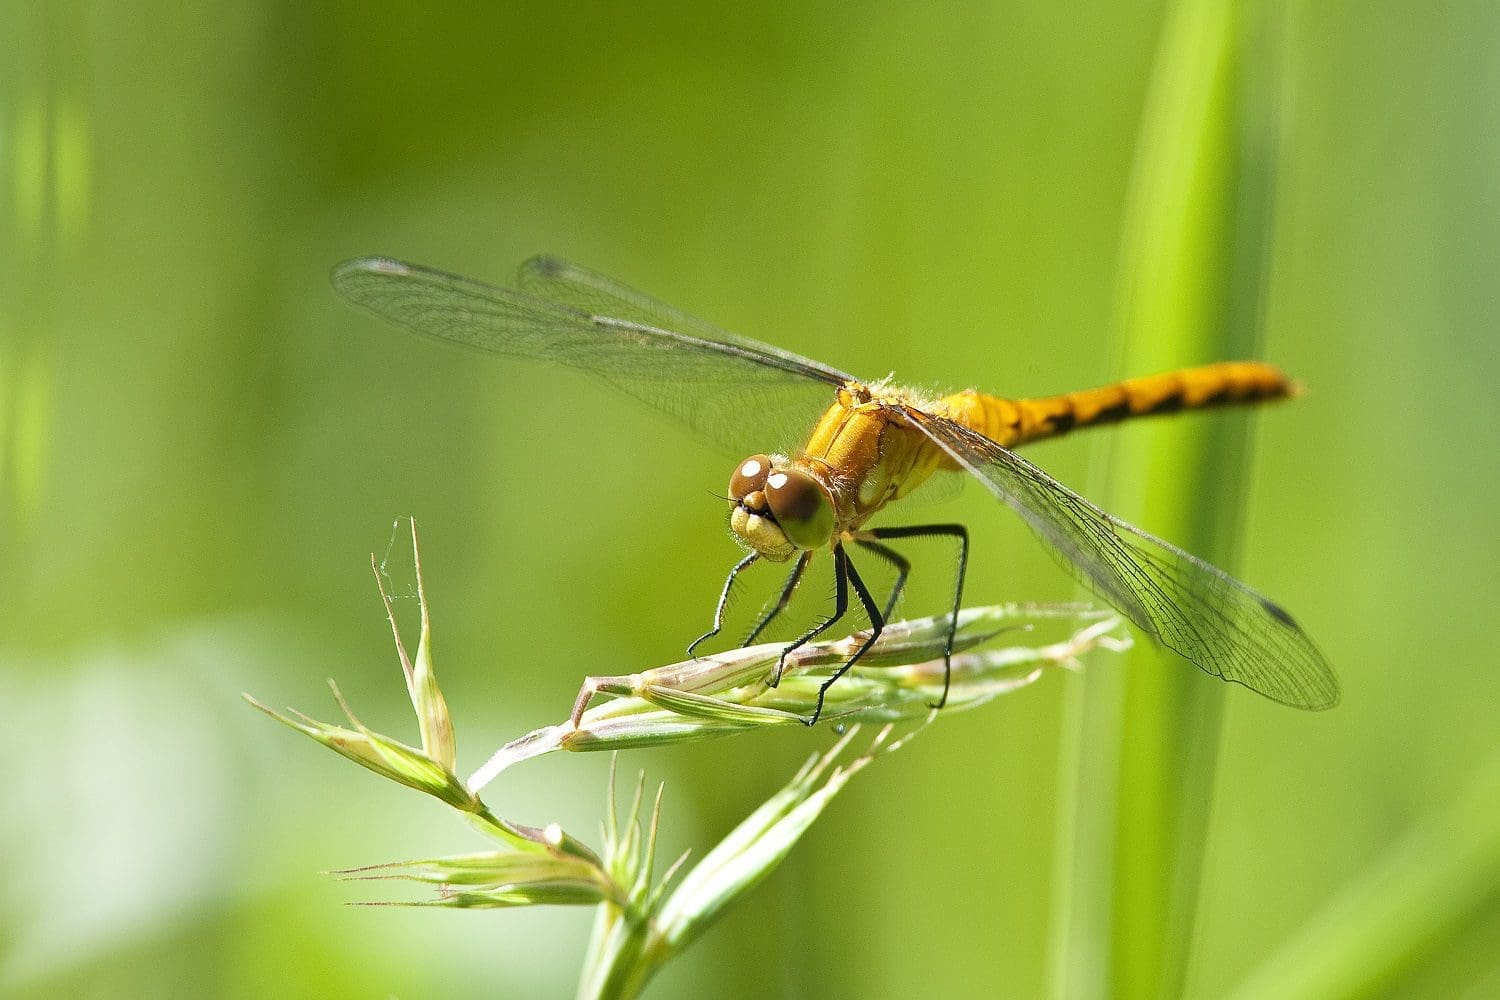 Dragonflies migrate using natural landscape features to guide them.